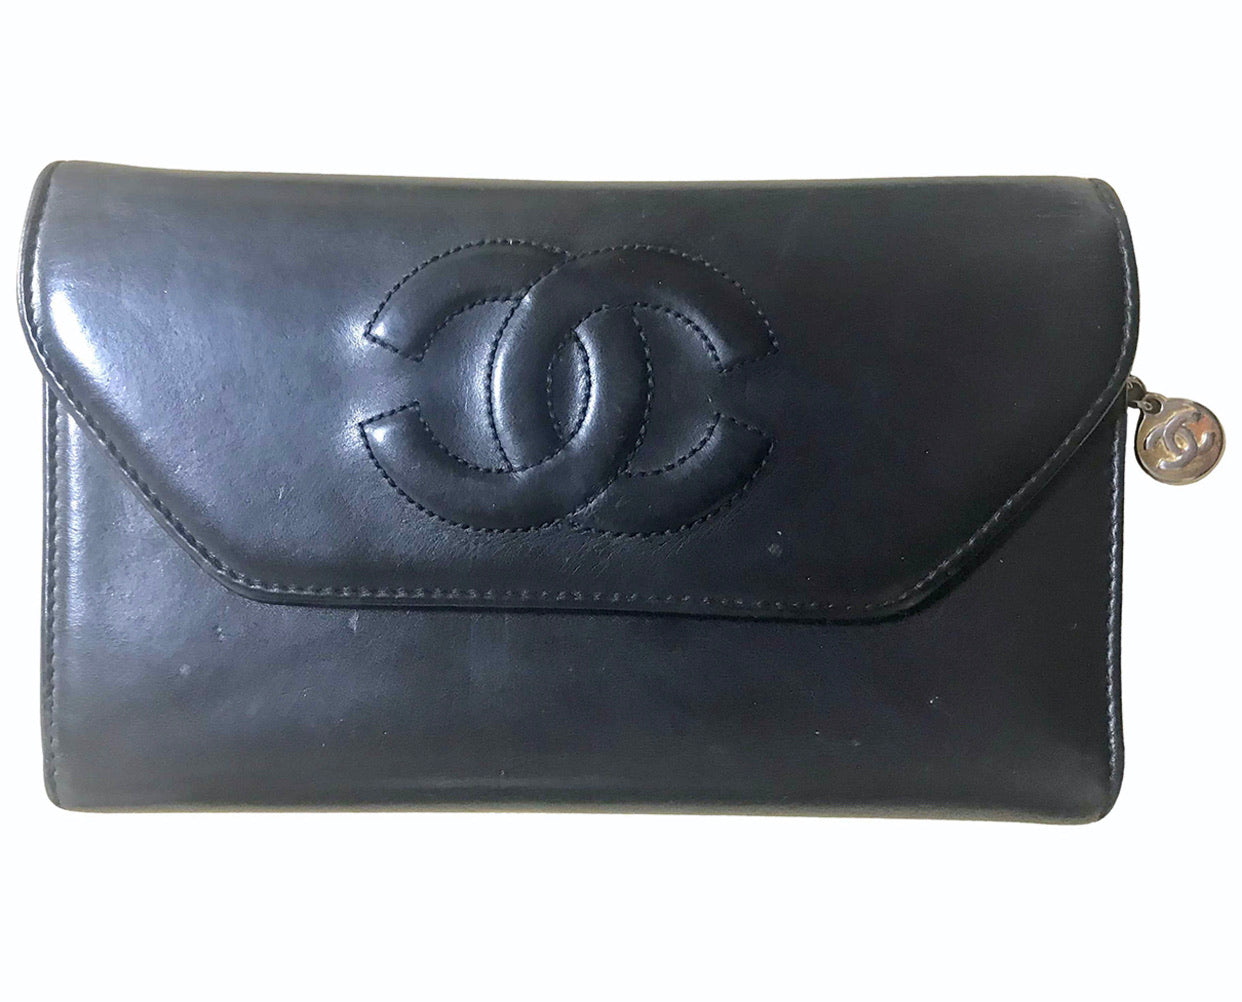 Vintage CHANEL black leather wallet with large CC stitch mark